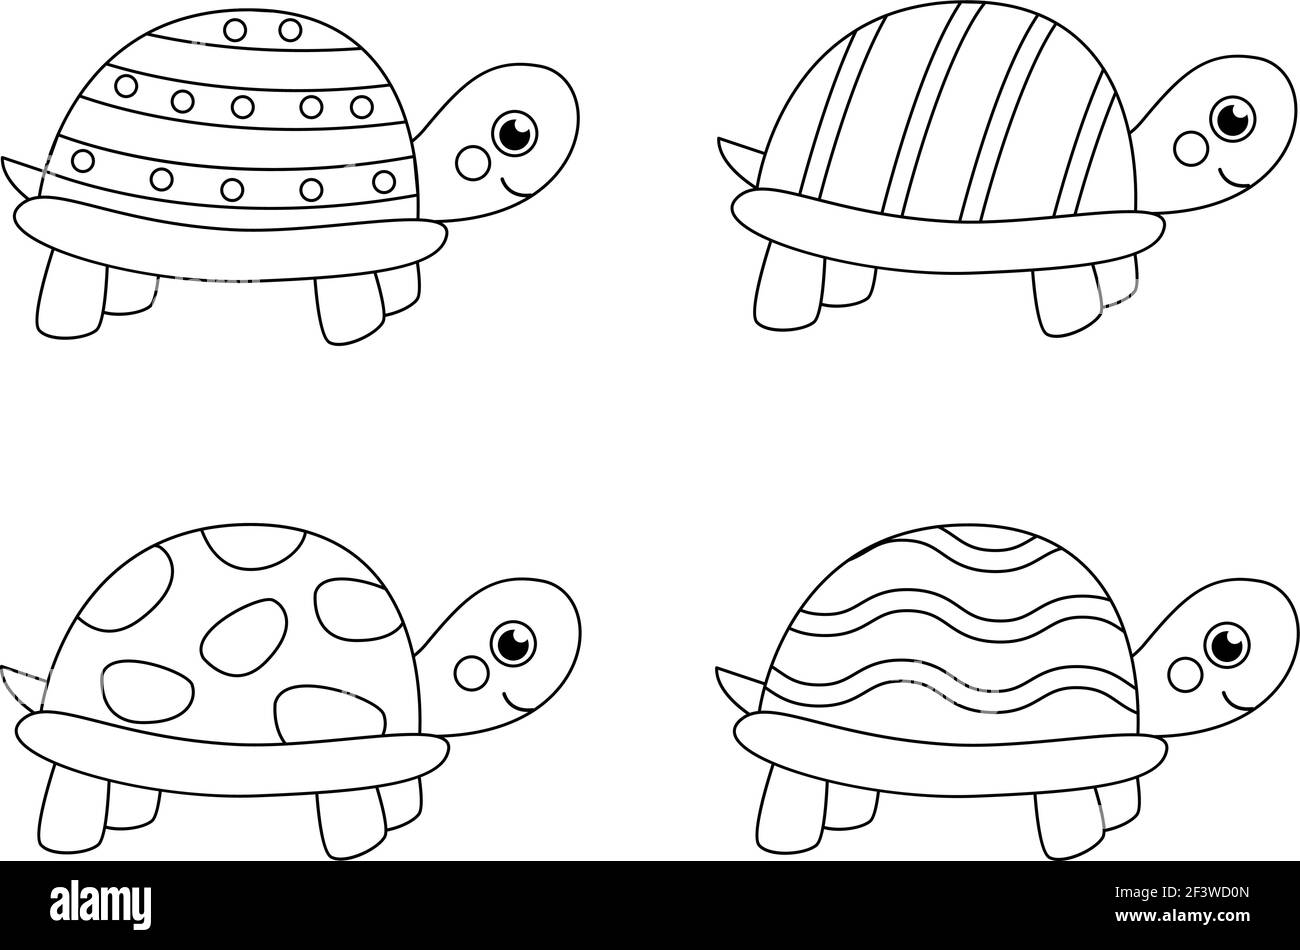 Coloring Page With Cute Turtles Set Of Black And White Tortoises Stock Vector Image Art Alamy